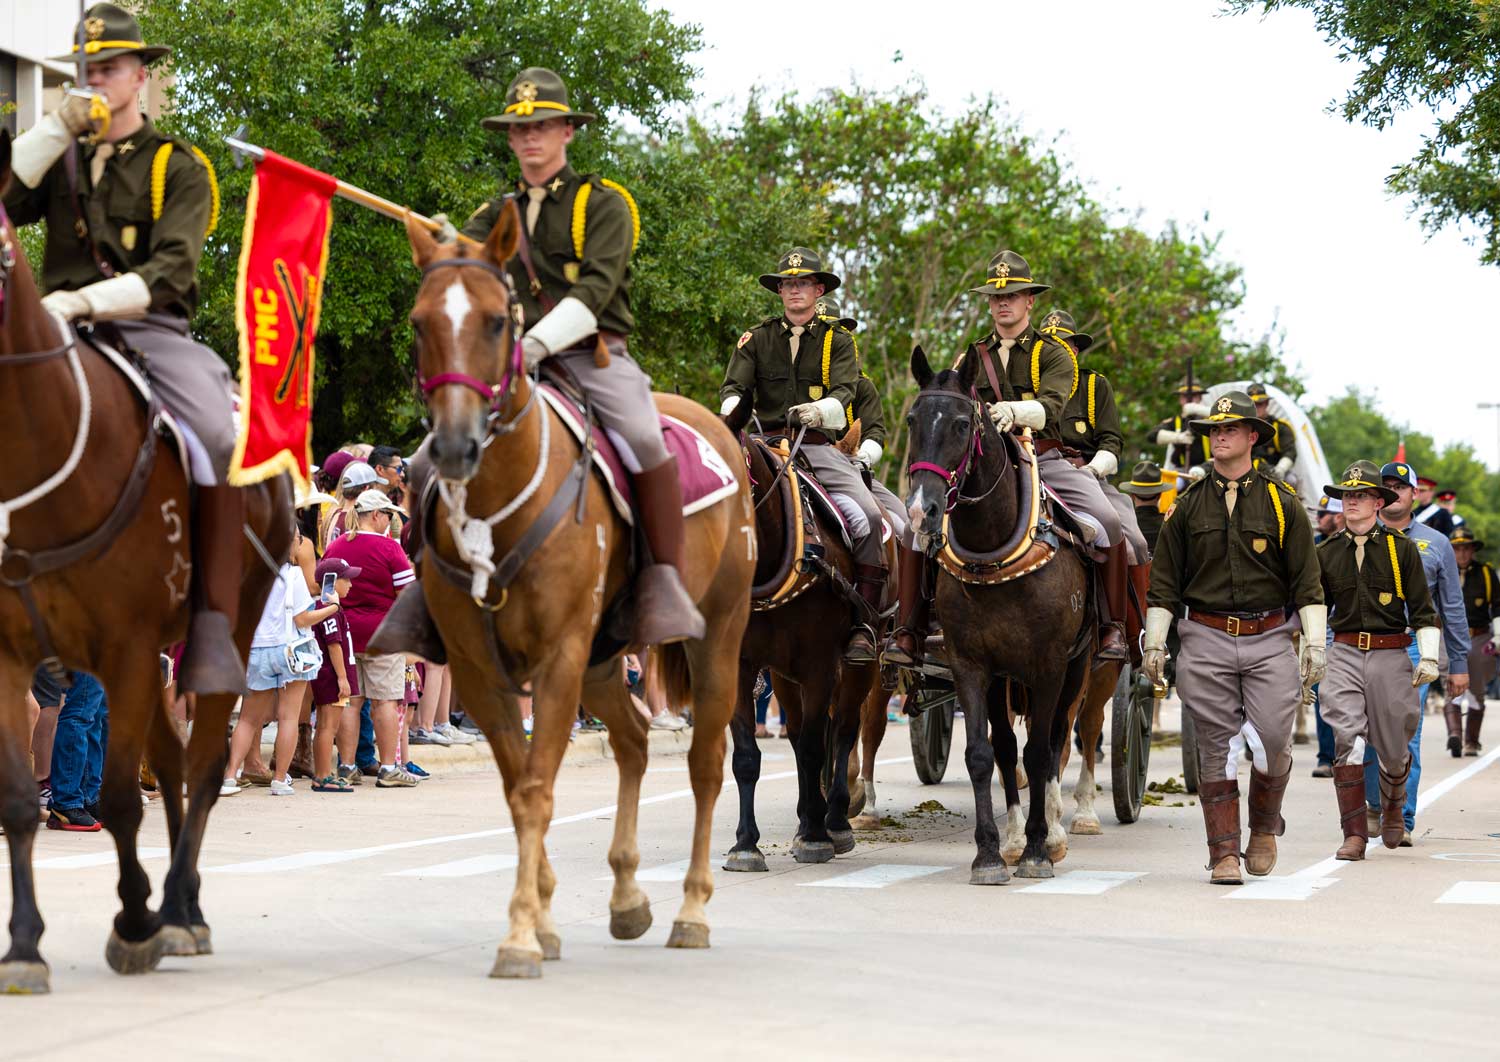 Members of Parsons Mounted Cavalry sit atop their horses as the Corps marches in on gameday